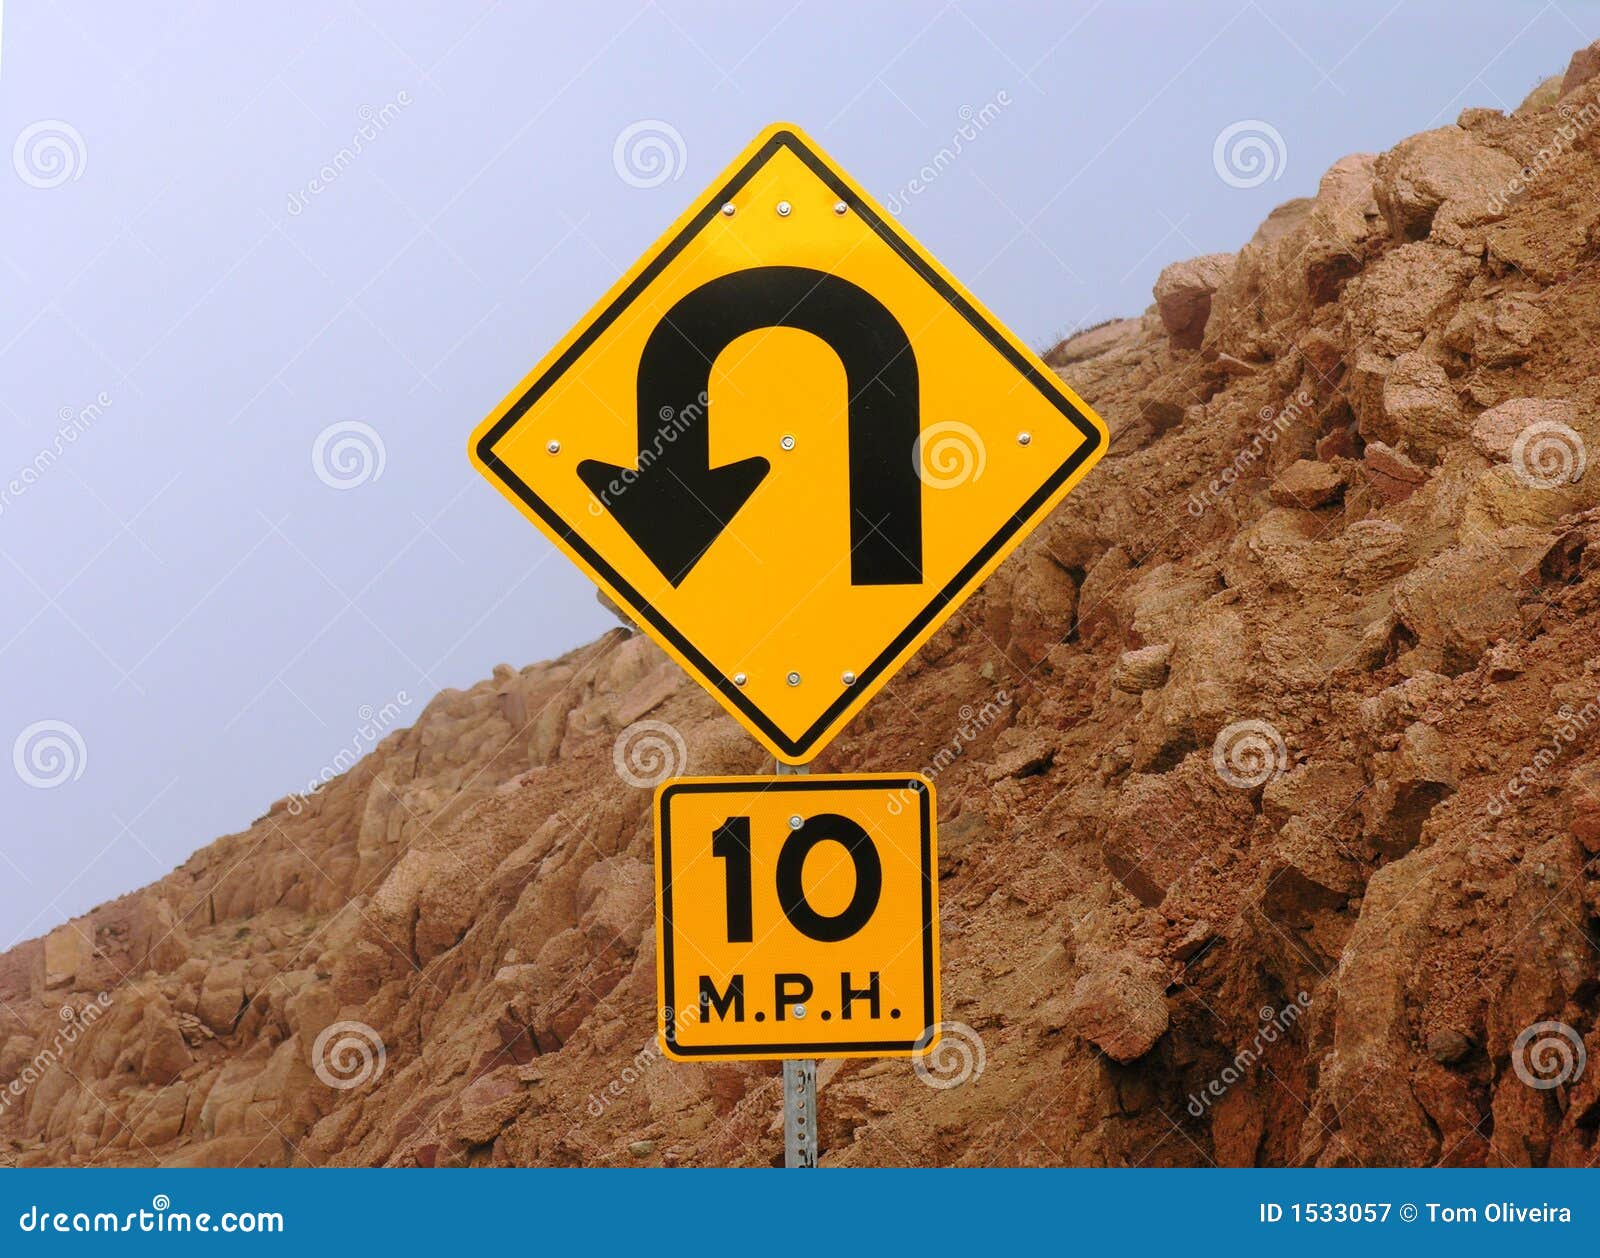 763 Mountain Road Sign Photos Free Royalty Free Stock Photos From Dreamstime